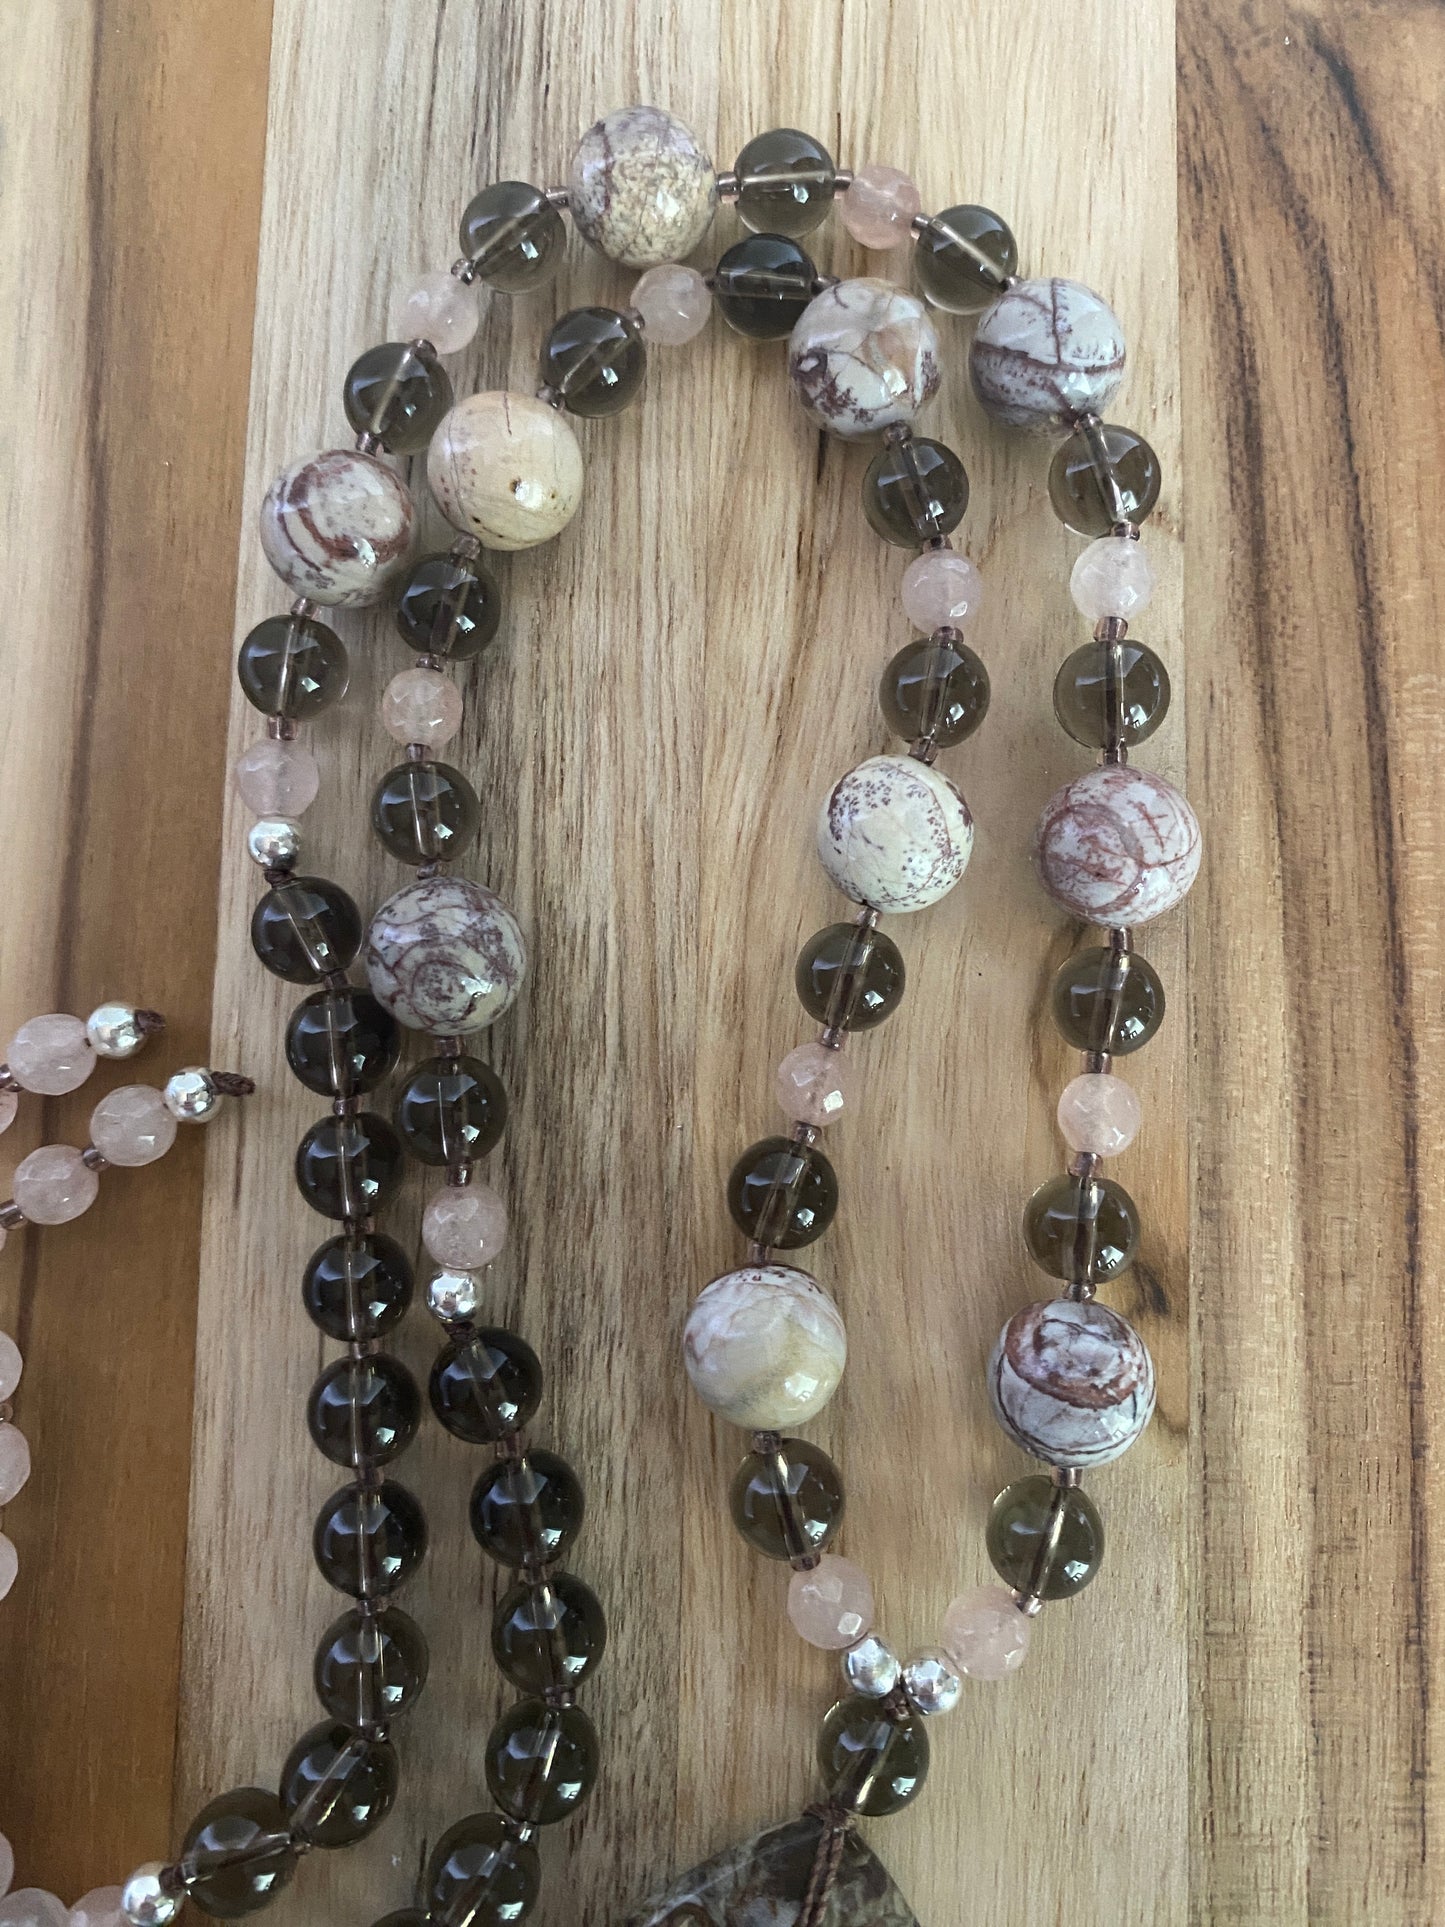 28" Long Ayaka Agate Pendant Necklace with Picasso Jasper, Smoky Quartz & Agate Beads